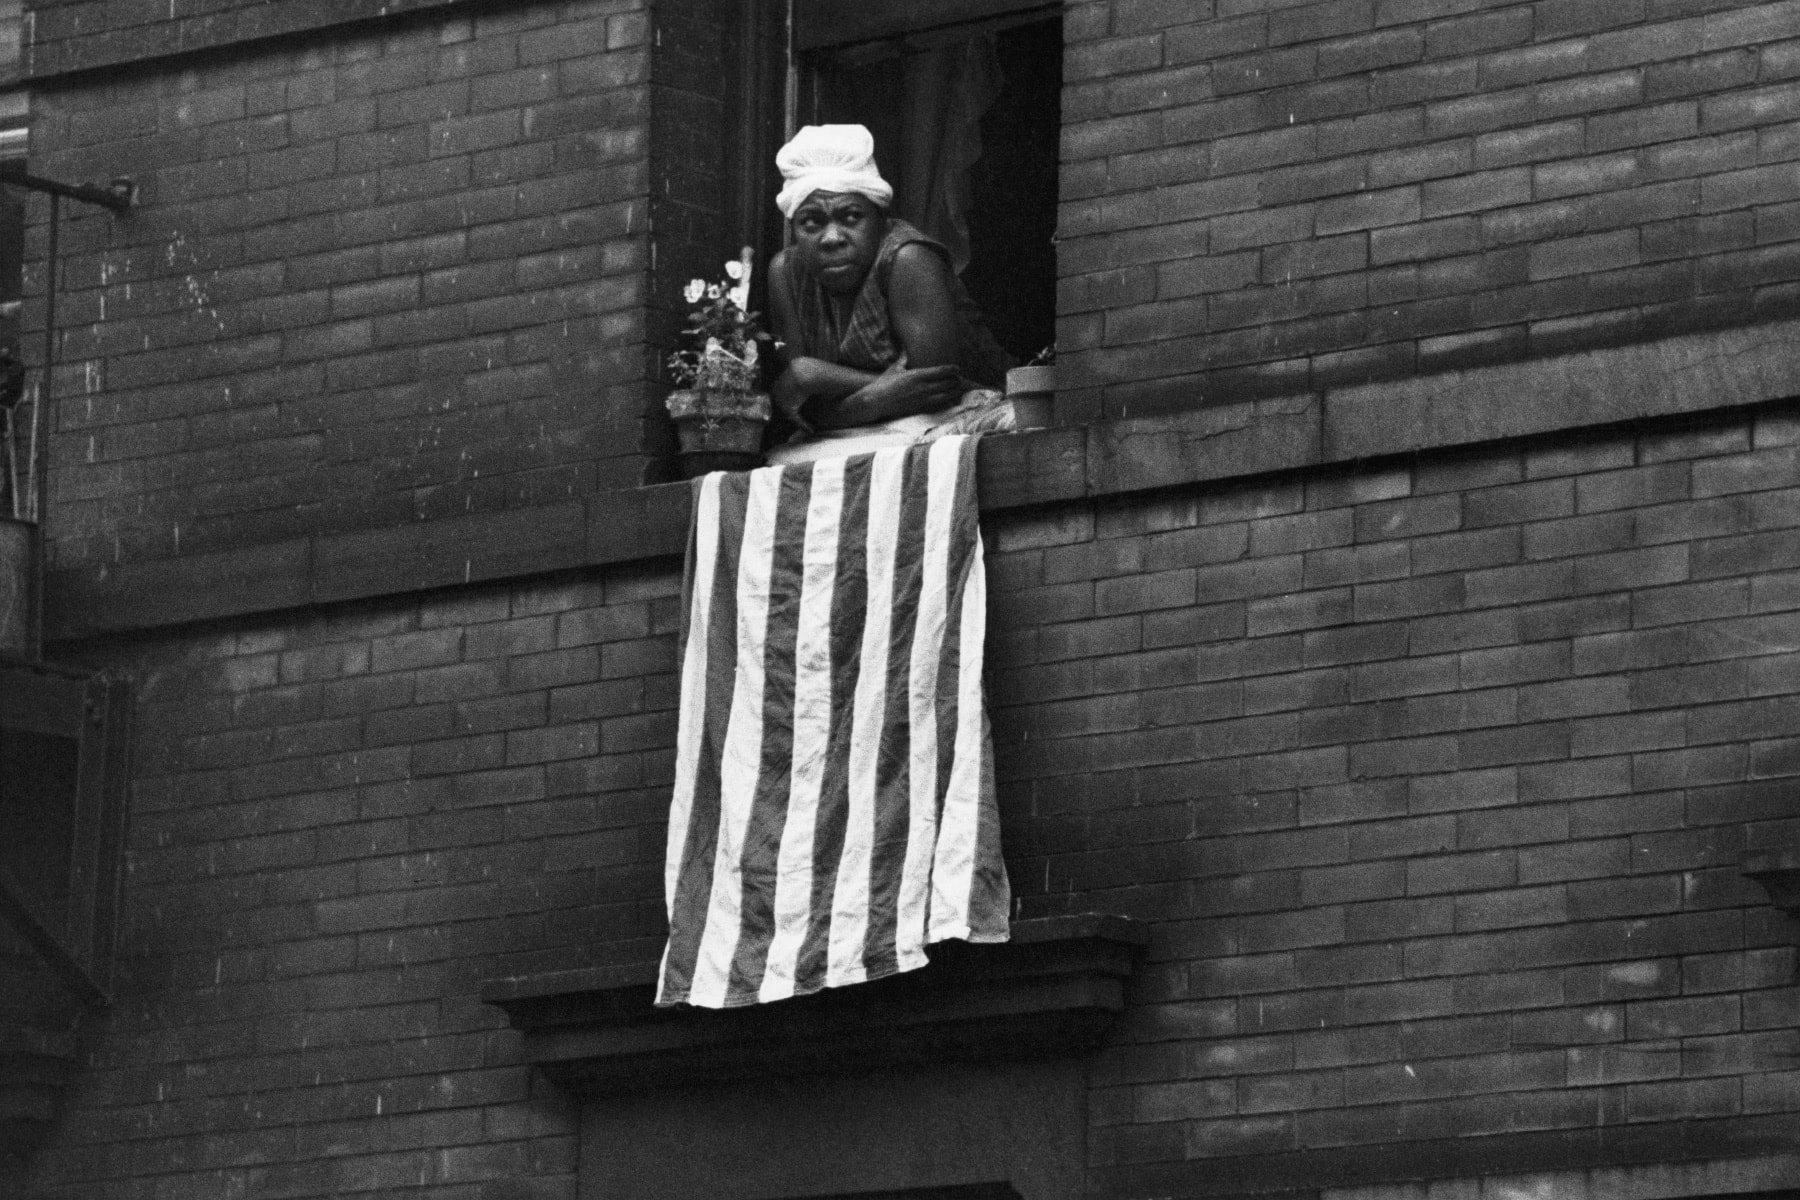 Time of Change (woman at window with American flag), Bruce Davidson, 1962